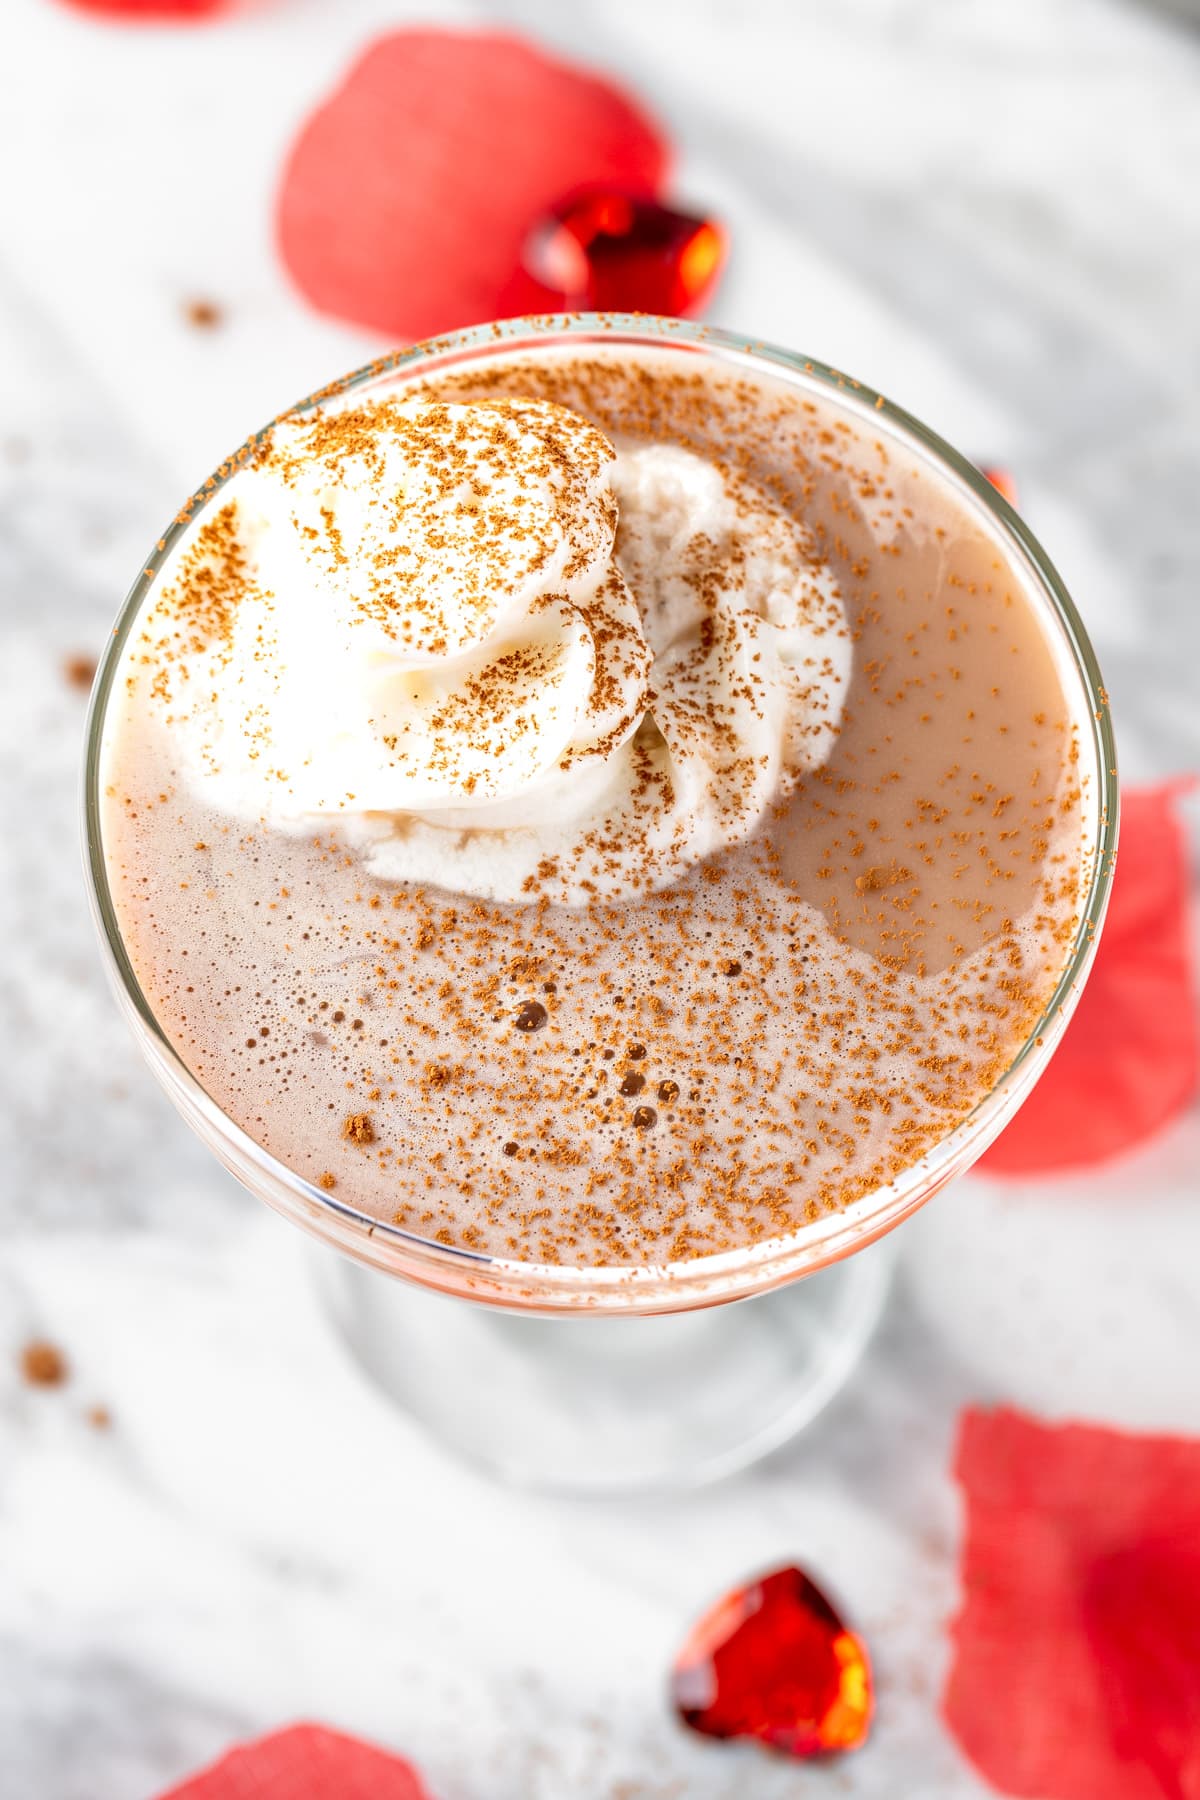 A Strawberry Chocolate Martini topped with whipped cream and a sprinkle of cocoa powder.